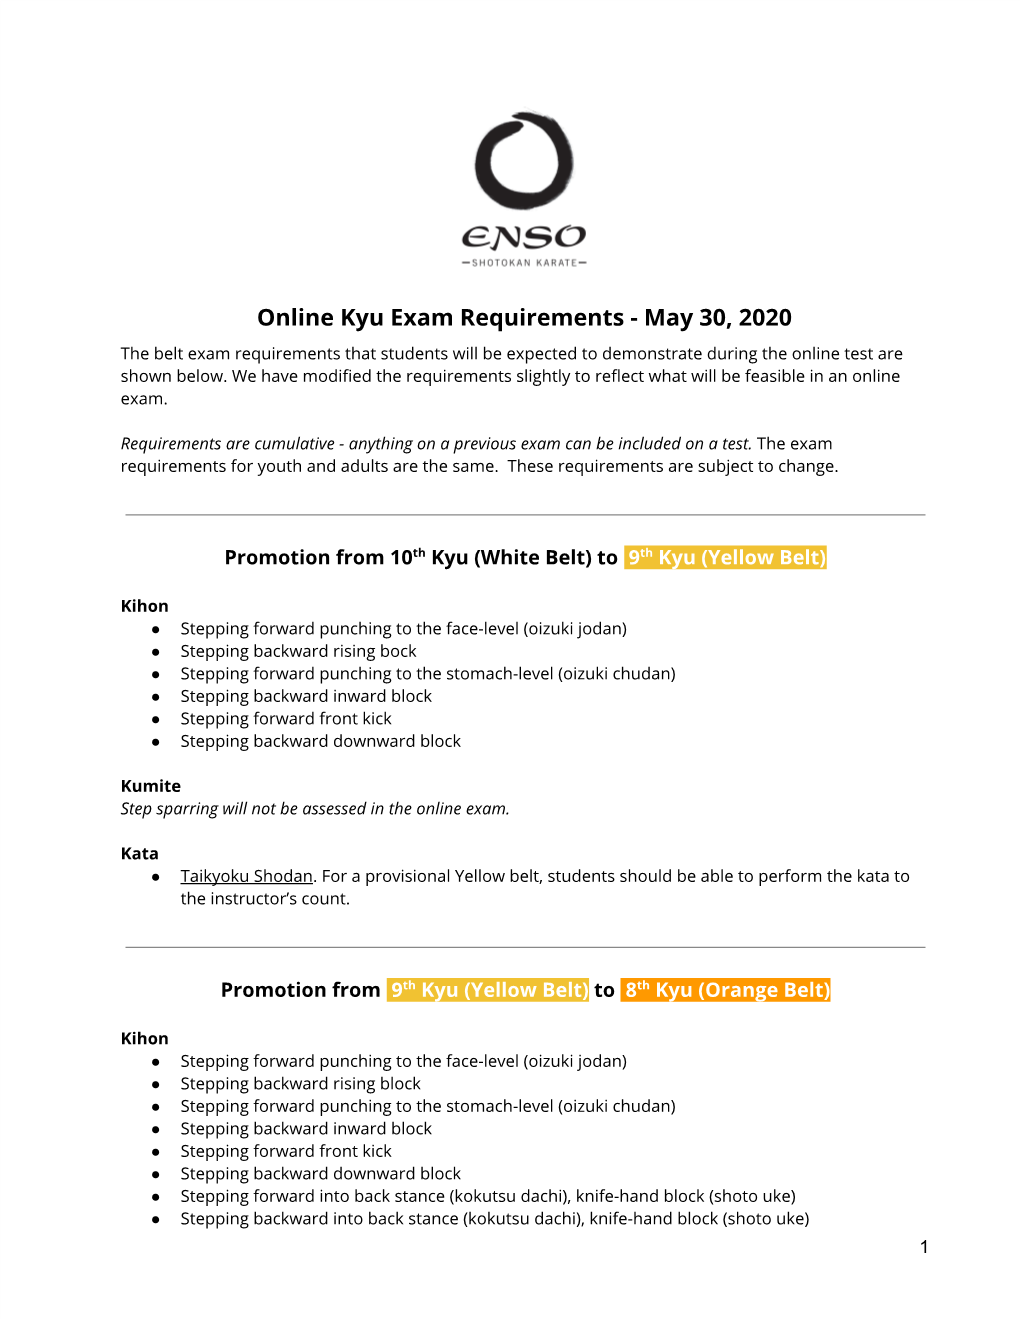 Online Kyu Exam Requirements - May 30, 2020 the Belt Exam Requirements That Students Will Be Expected to Demonstrate During the Online Test Are Shown Below